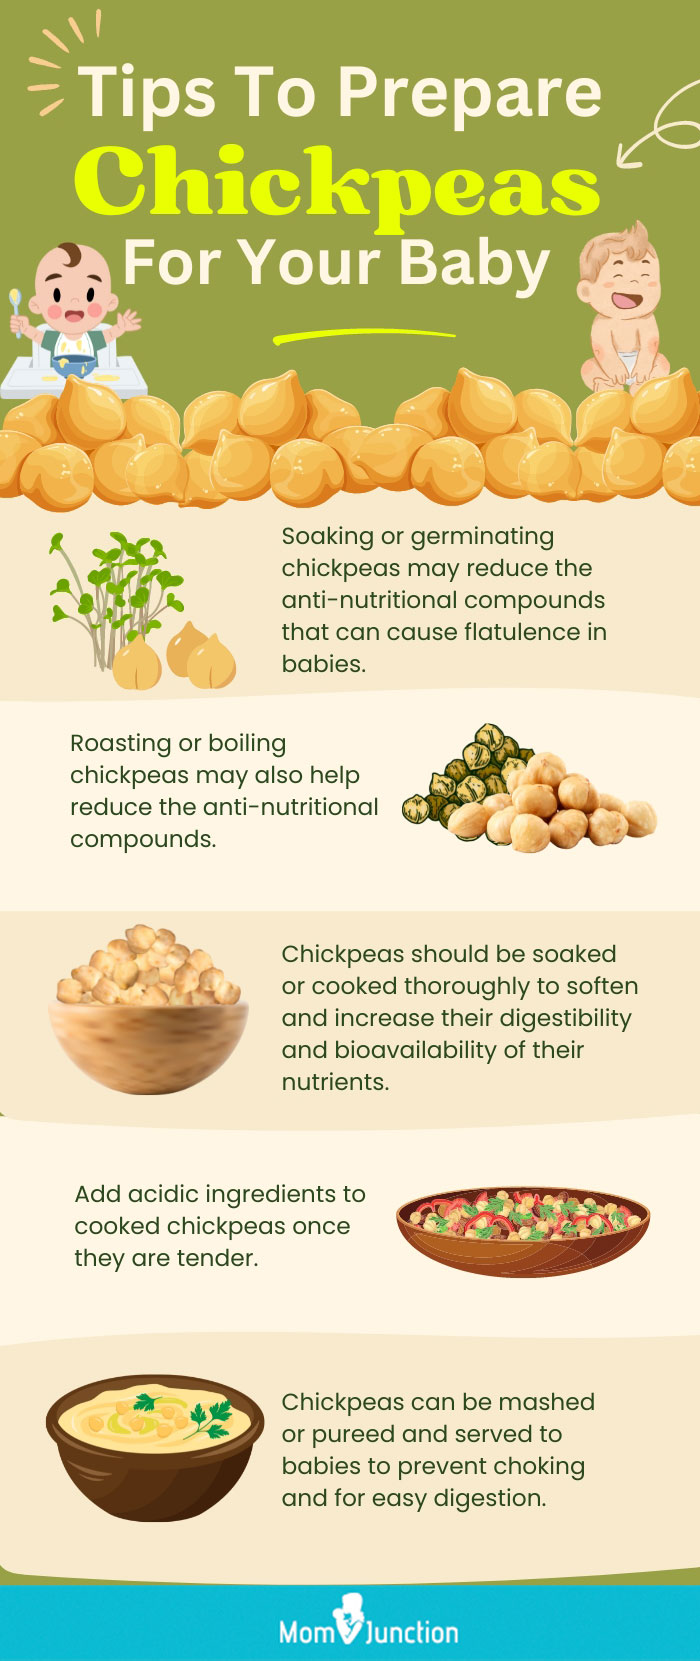 tips to prepare chickpeas for your baby (infographic)